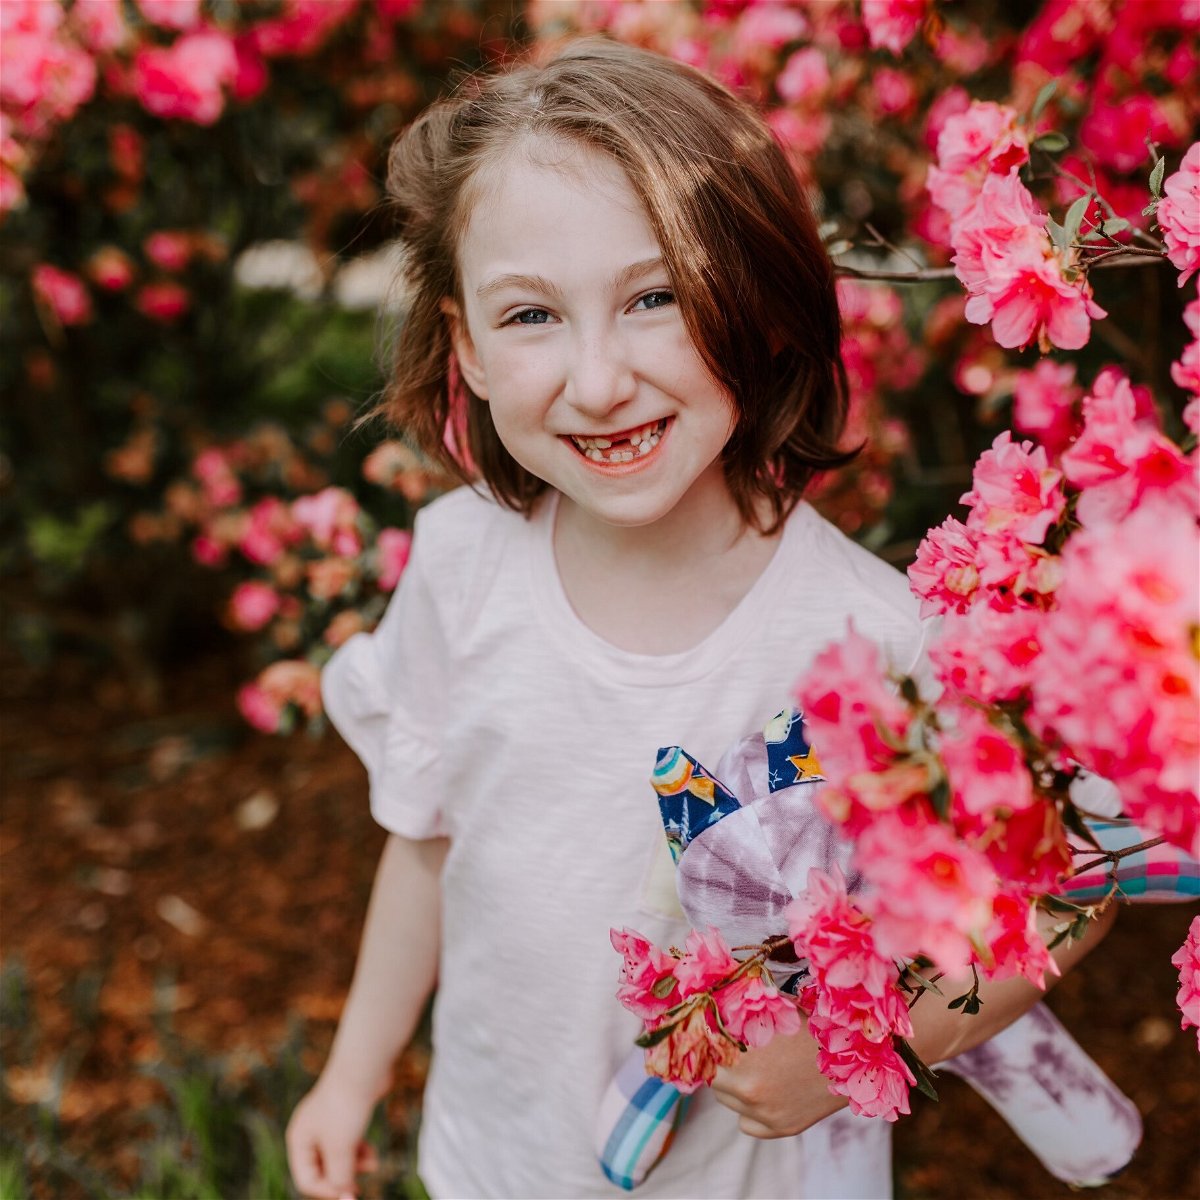 <i>Nichole Park Photography</i><br/>An 8-year-old only got one RSVP to her birthday party